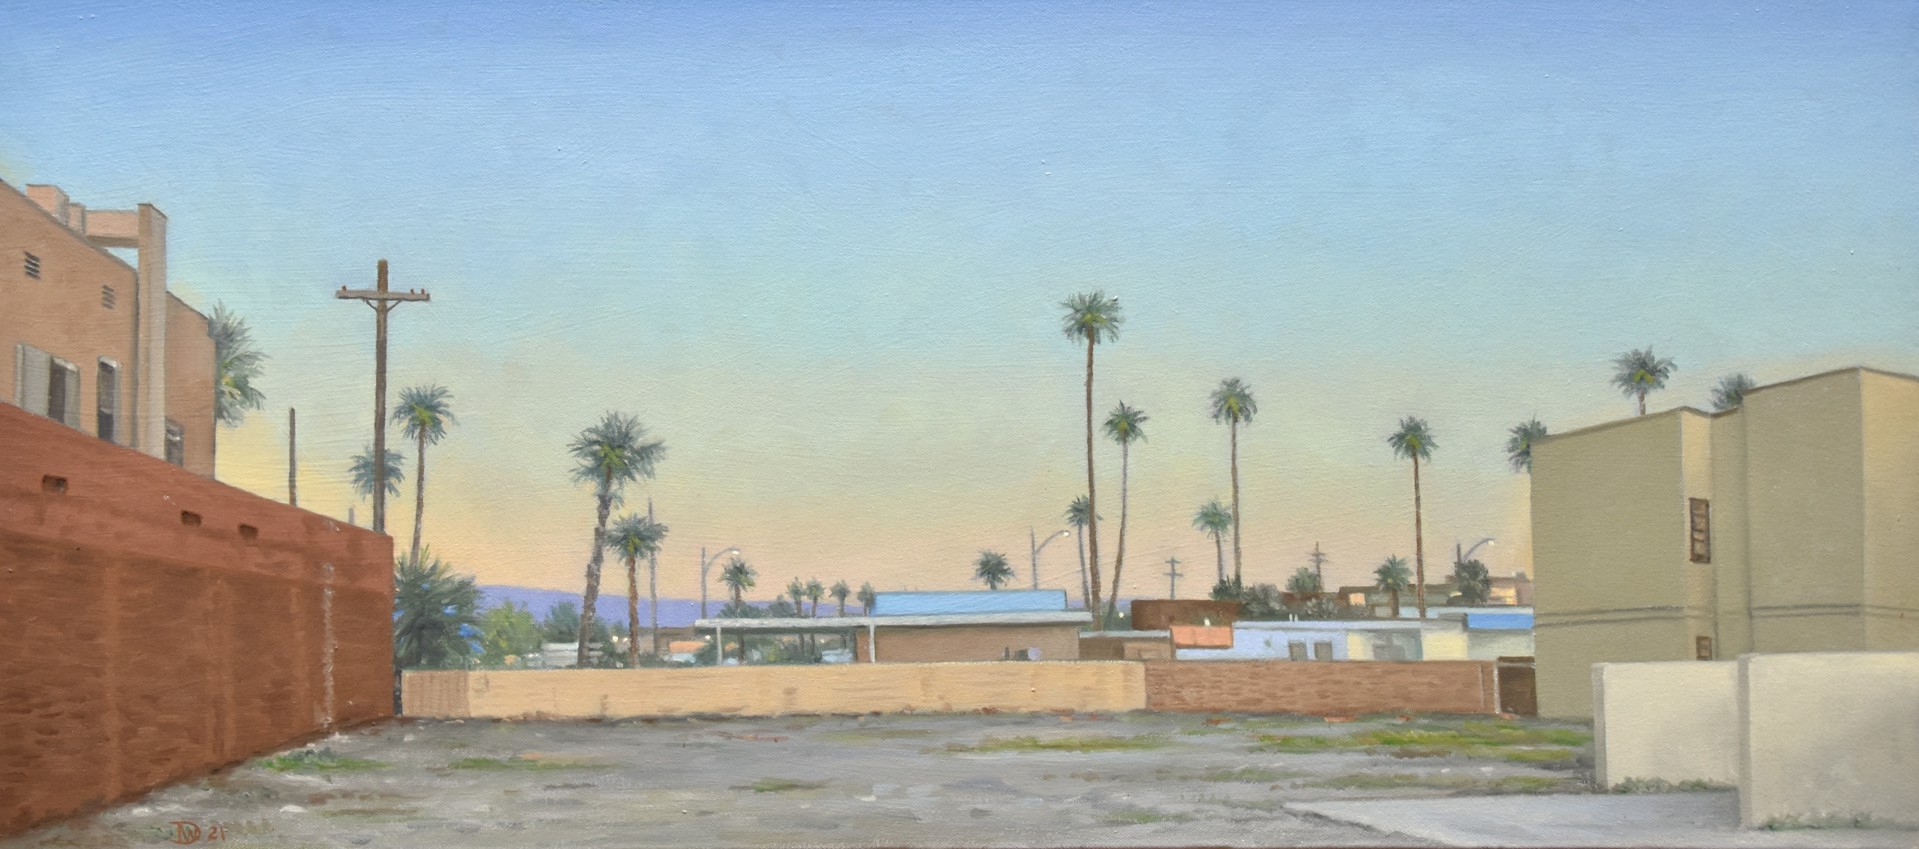 Vacant Lot, Palm Springs by Willard Dixon